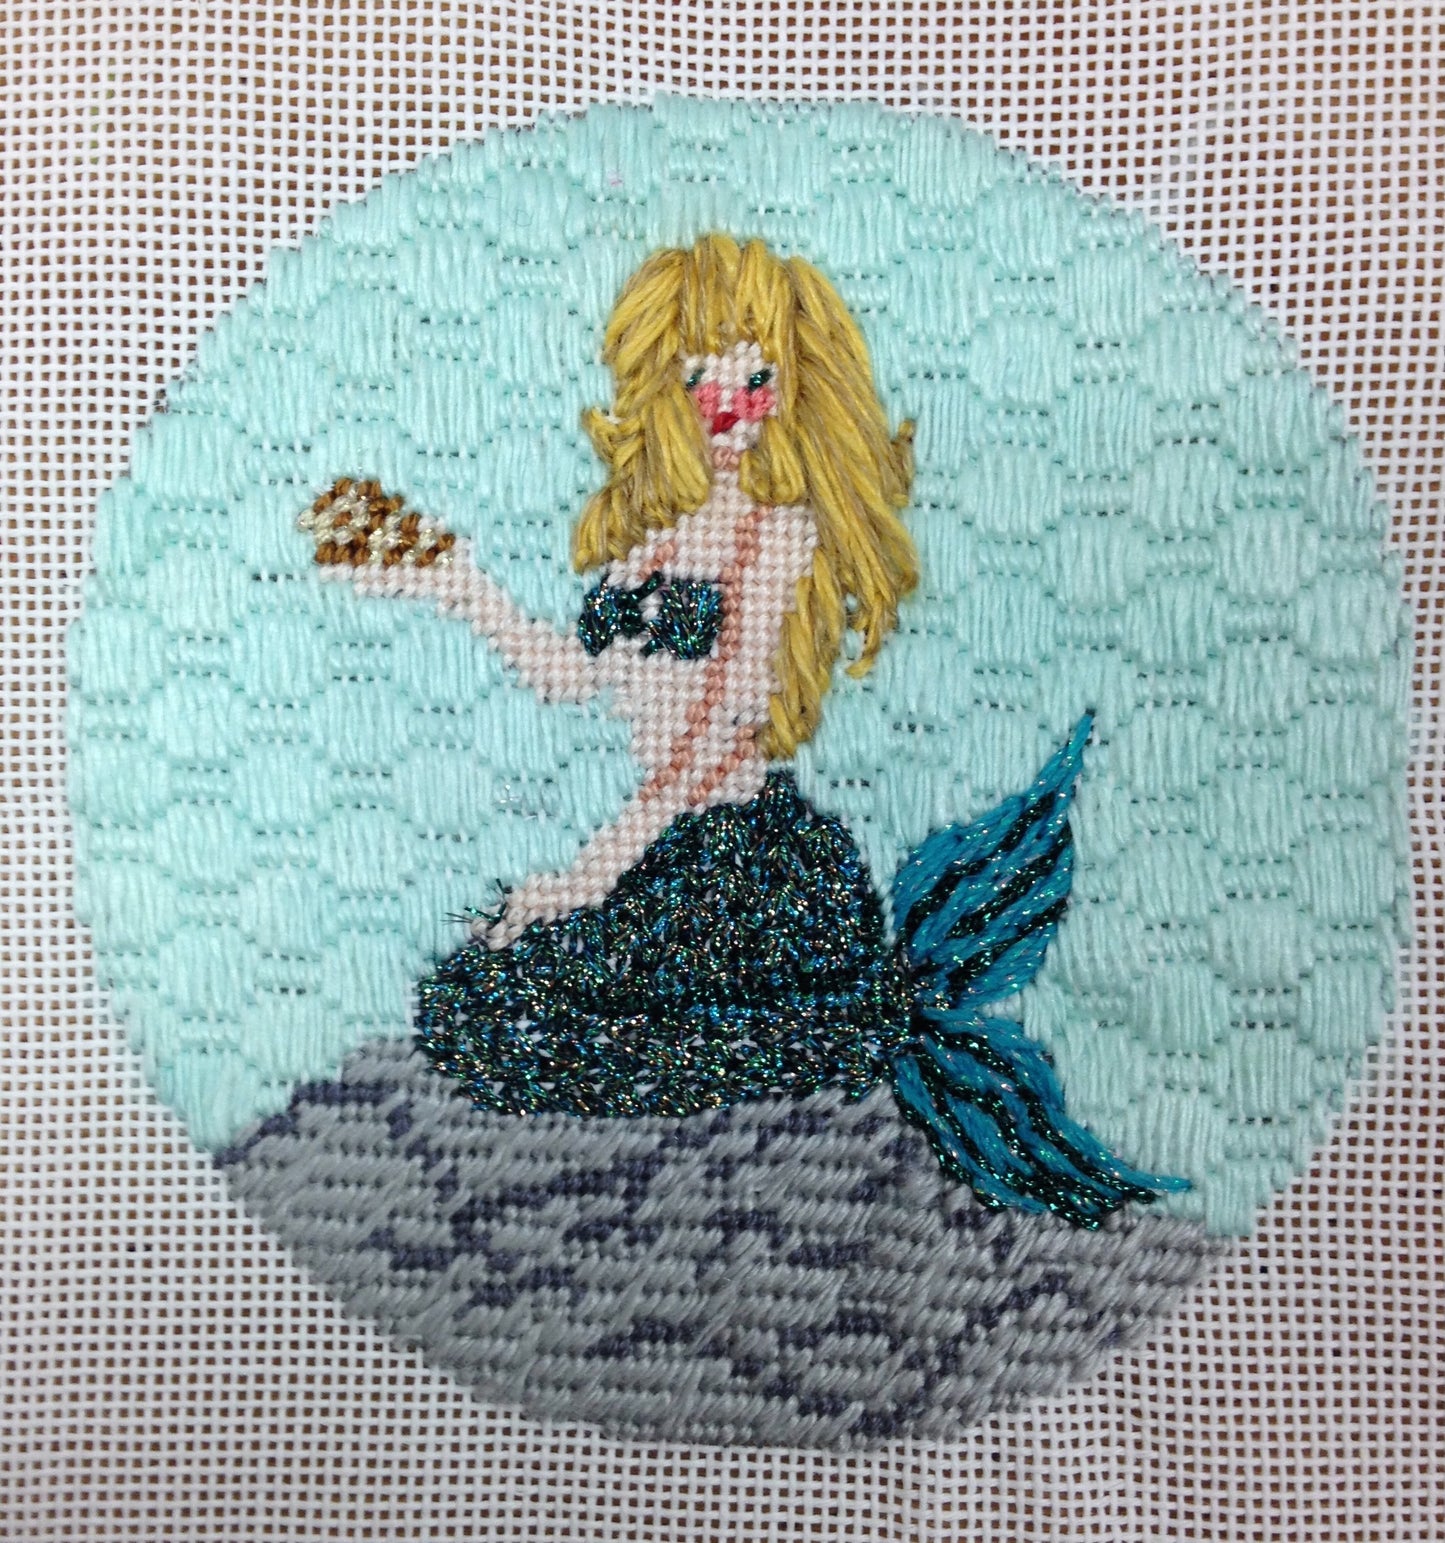 Mermaid ornament with stitch guide